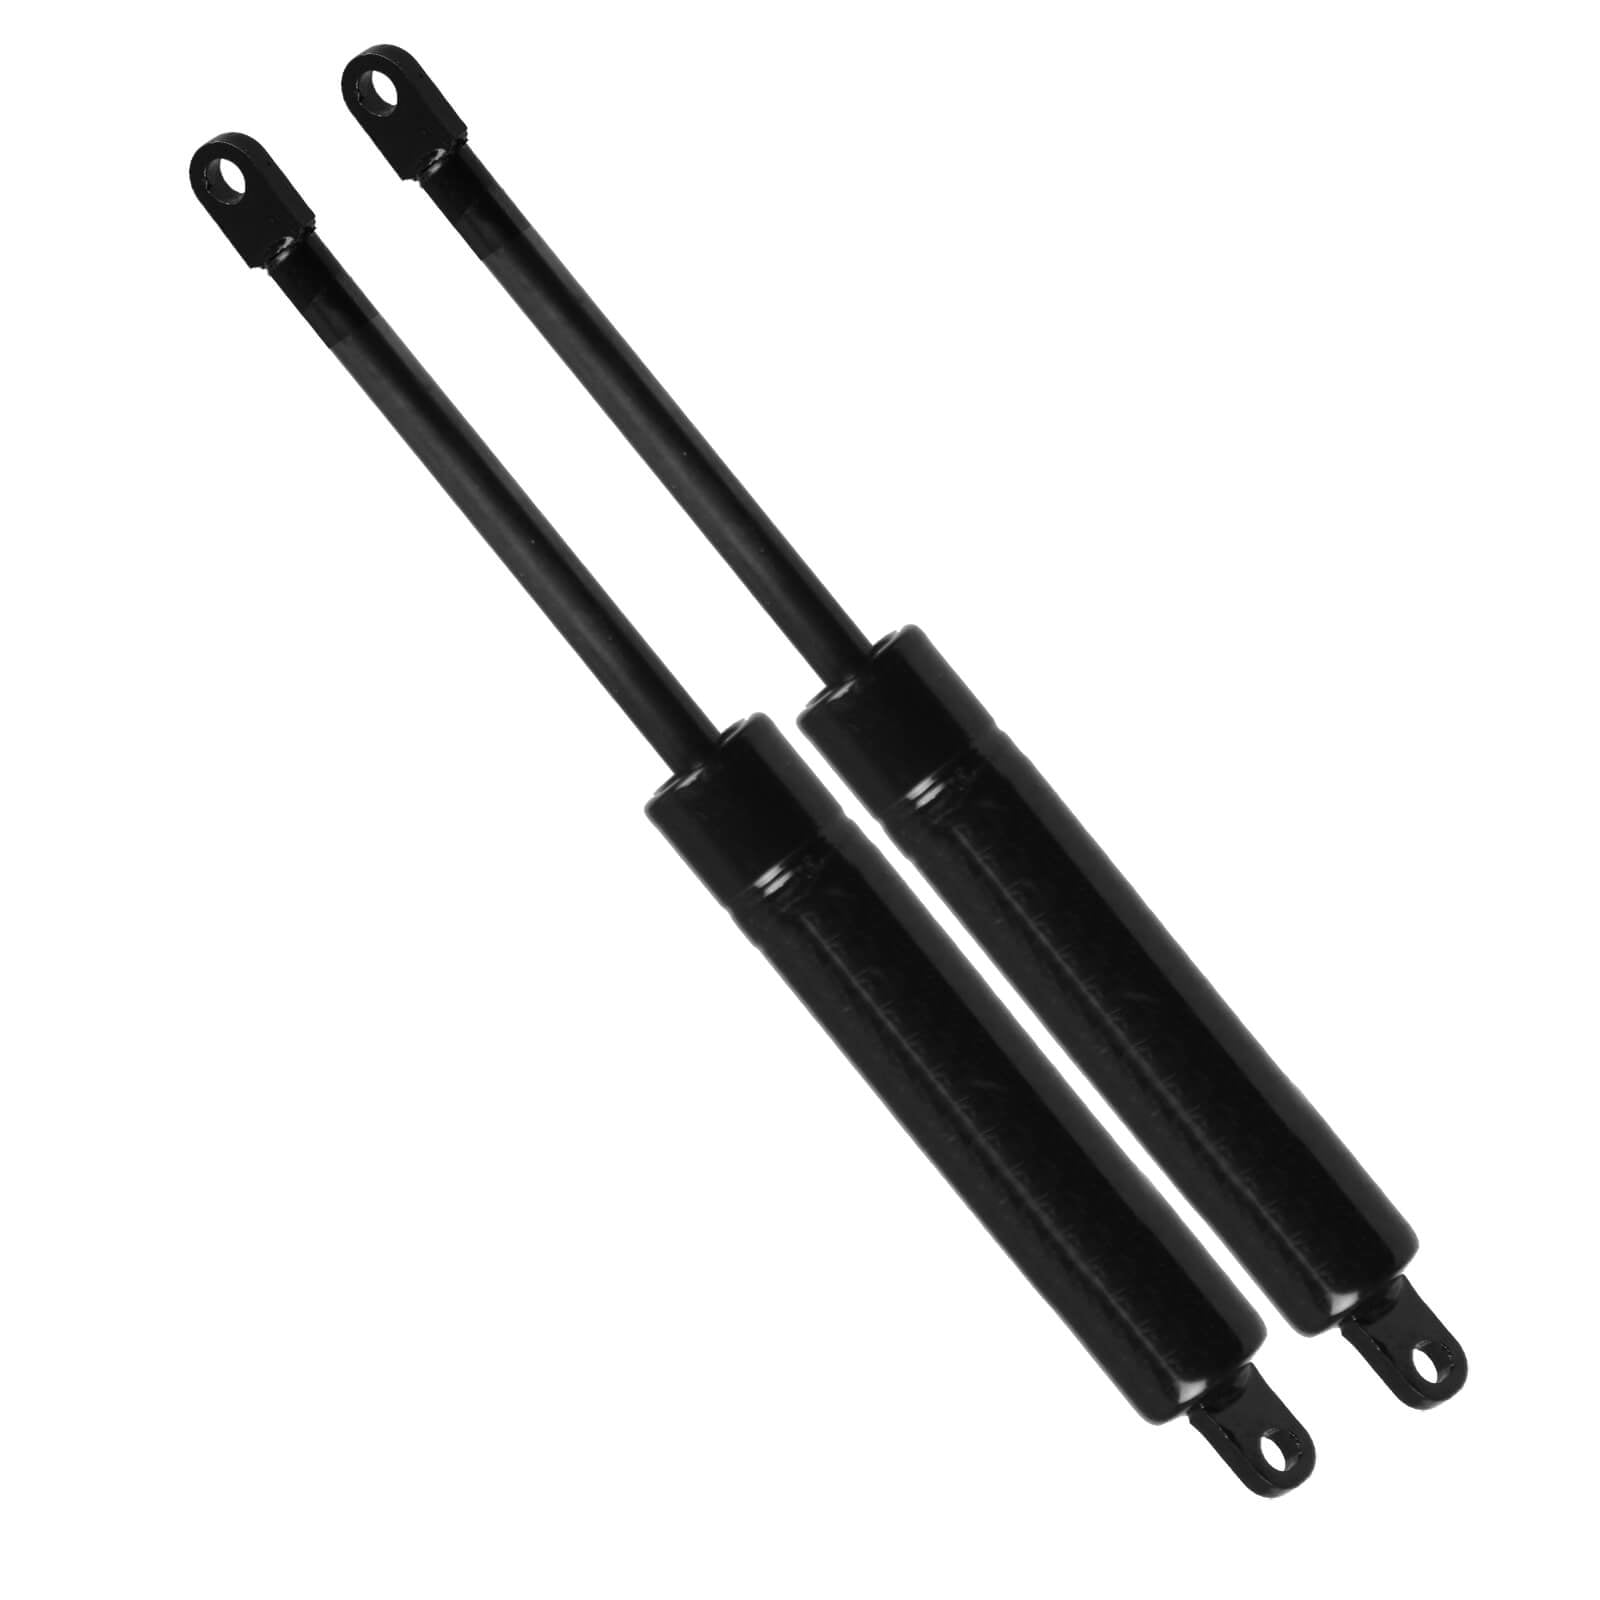 A-Premium Universal Lift Supports Shock Struts Spring Prop with Spike Extended Length 35.43 Compressed Length 19.69 Force 60lbs 2-PC Set